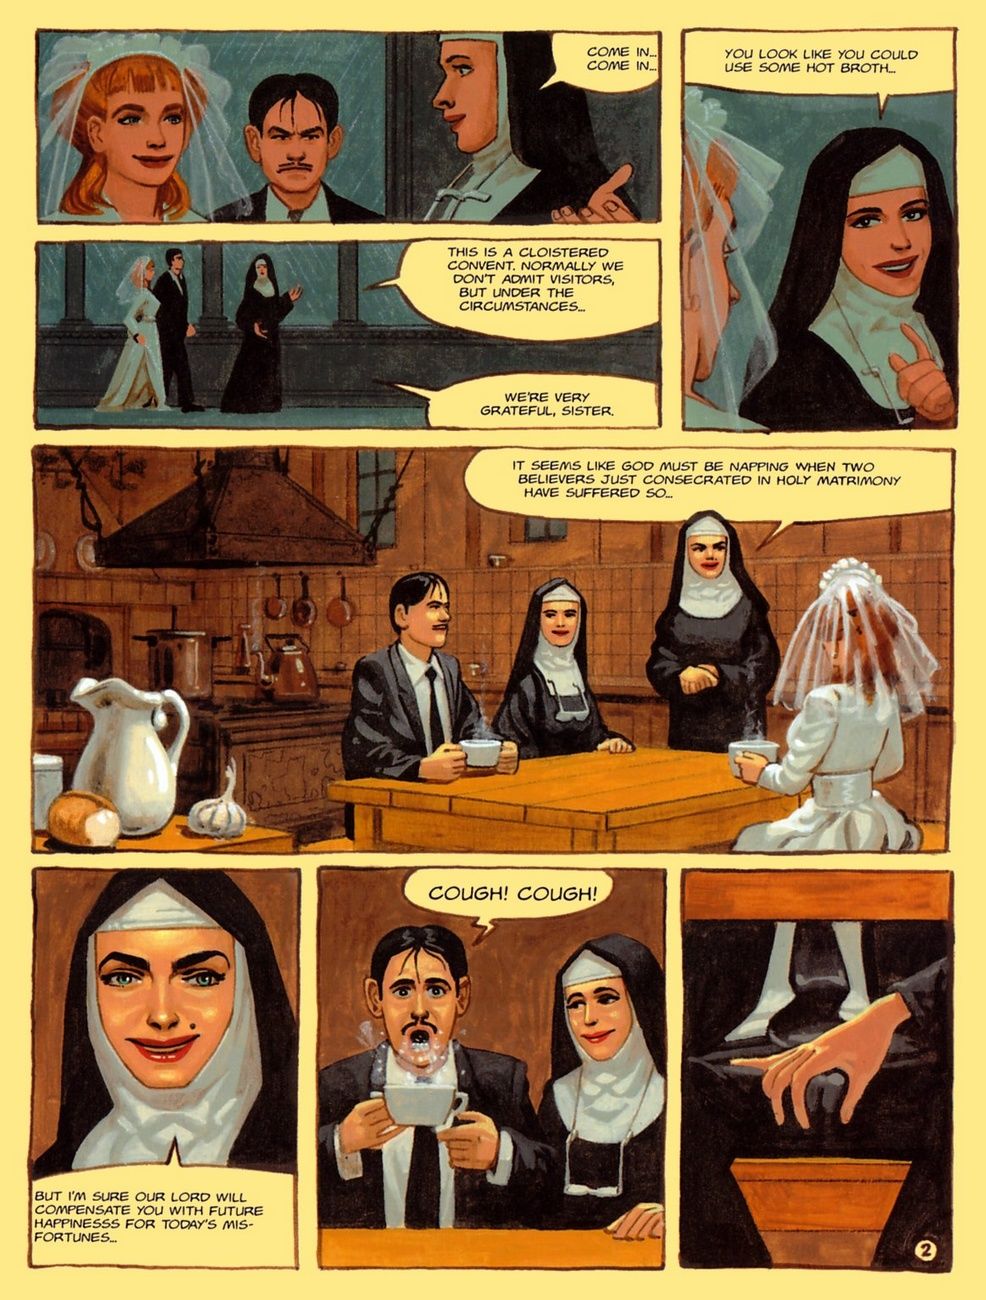 The Convent Of Hell - part 4 page 1